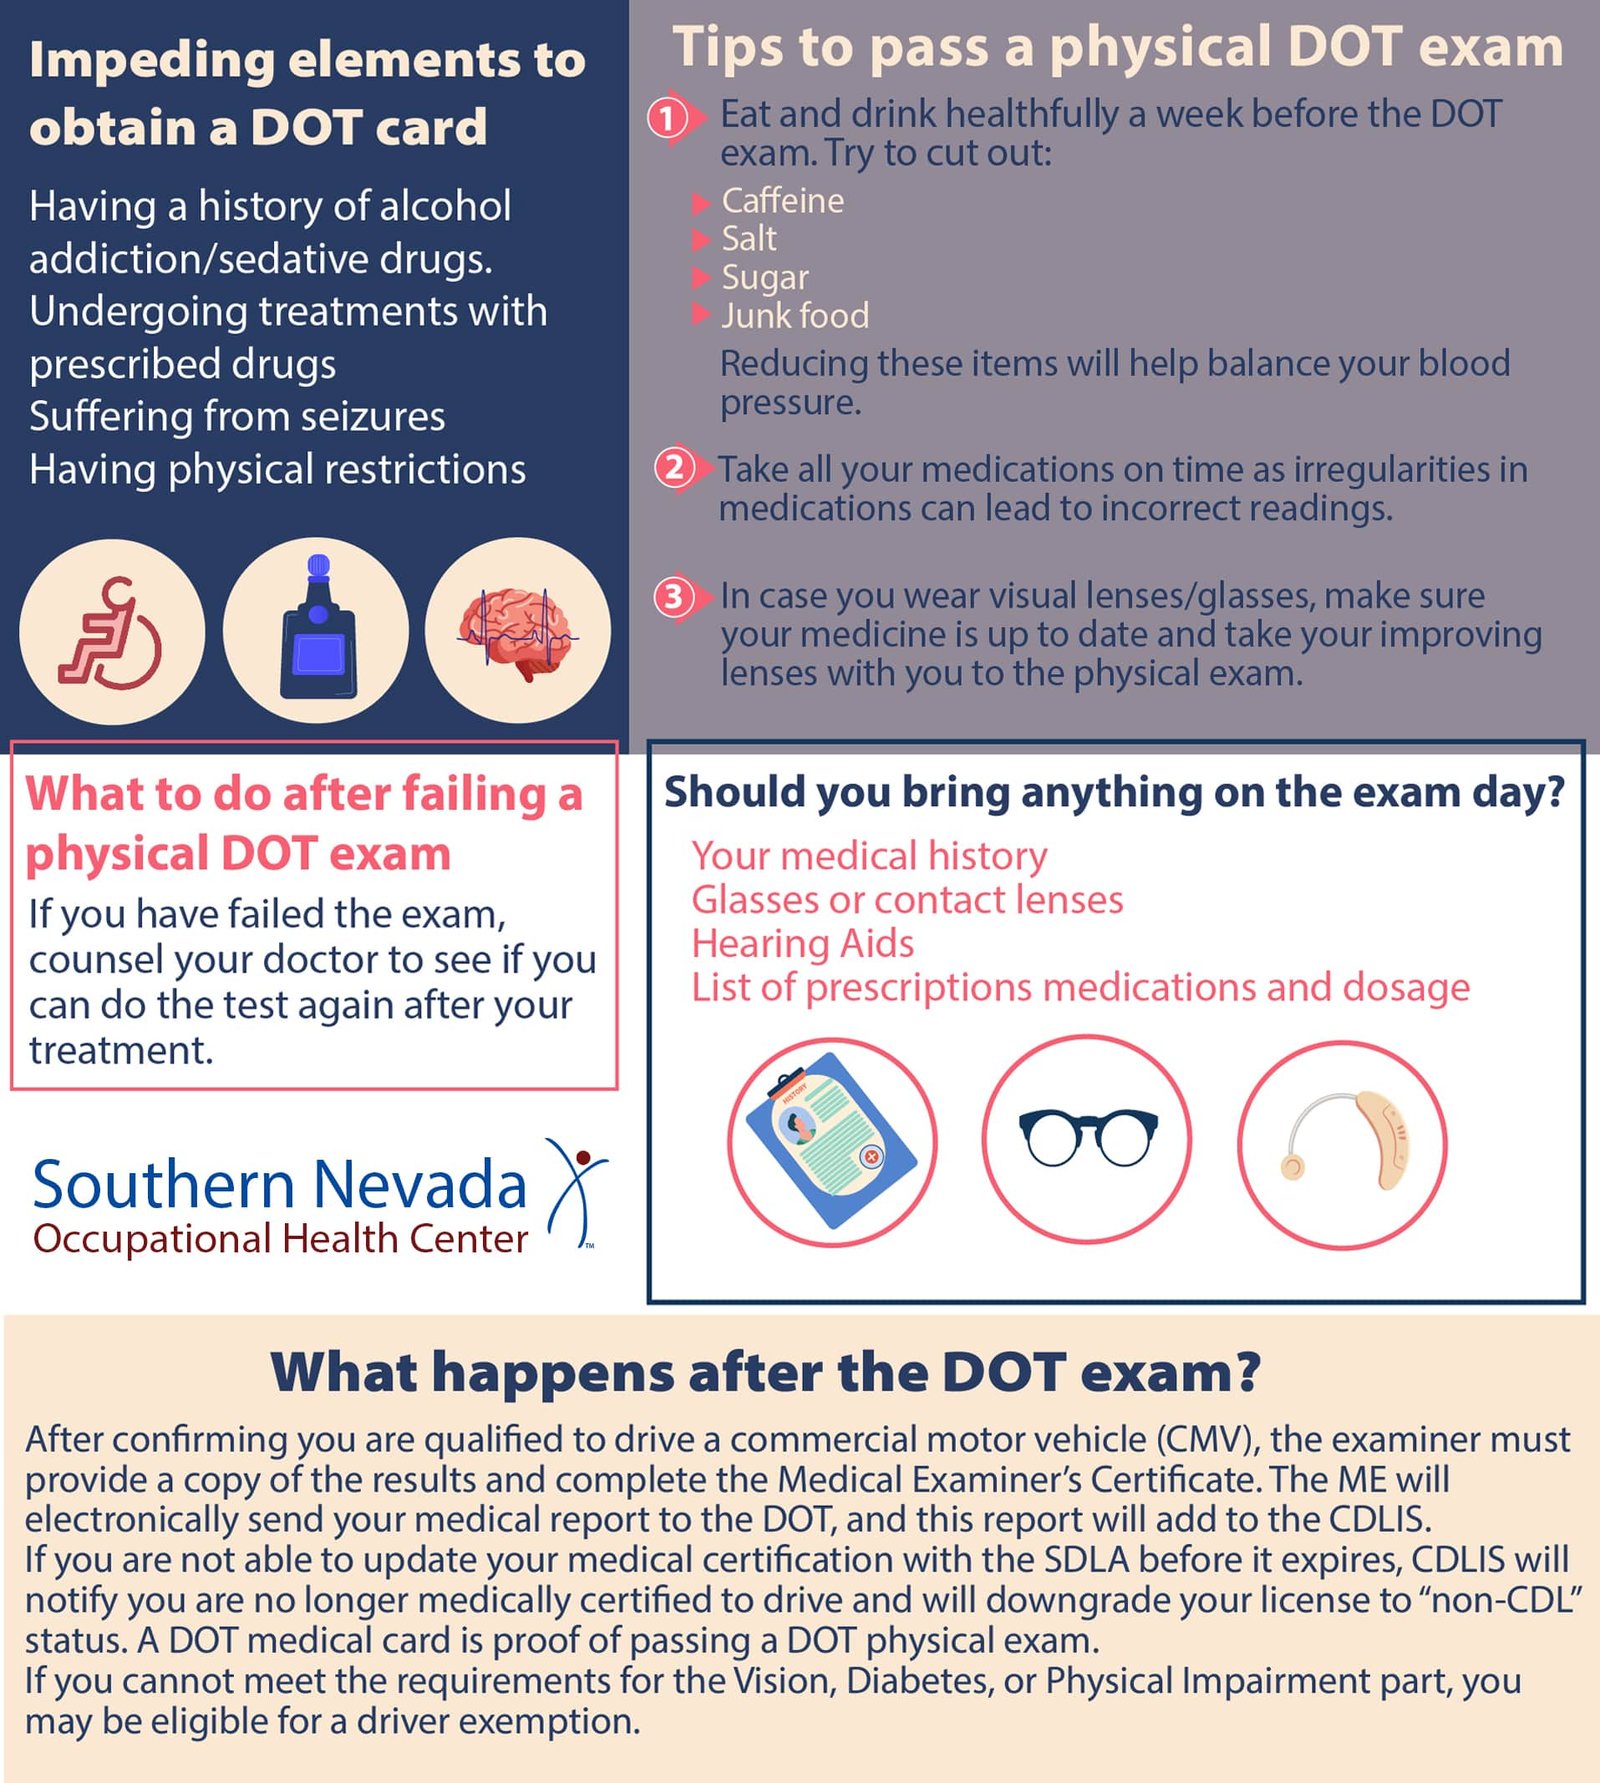 Does Dot Physical Test for Alcohol?